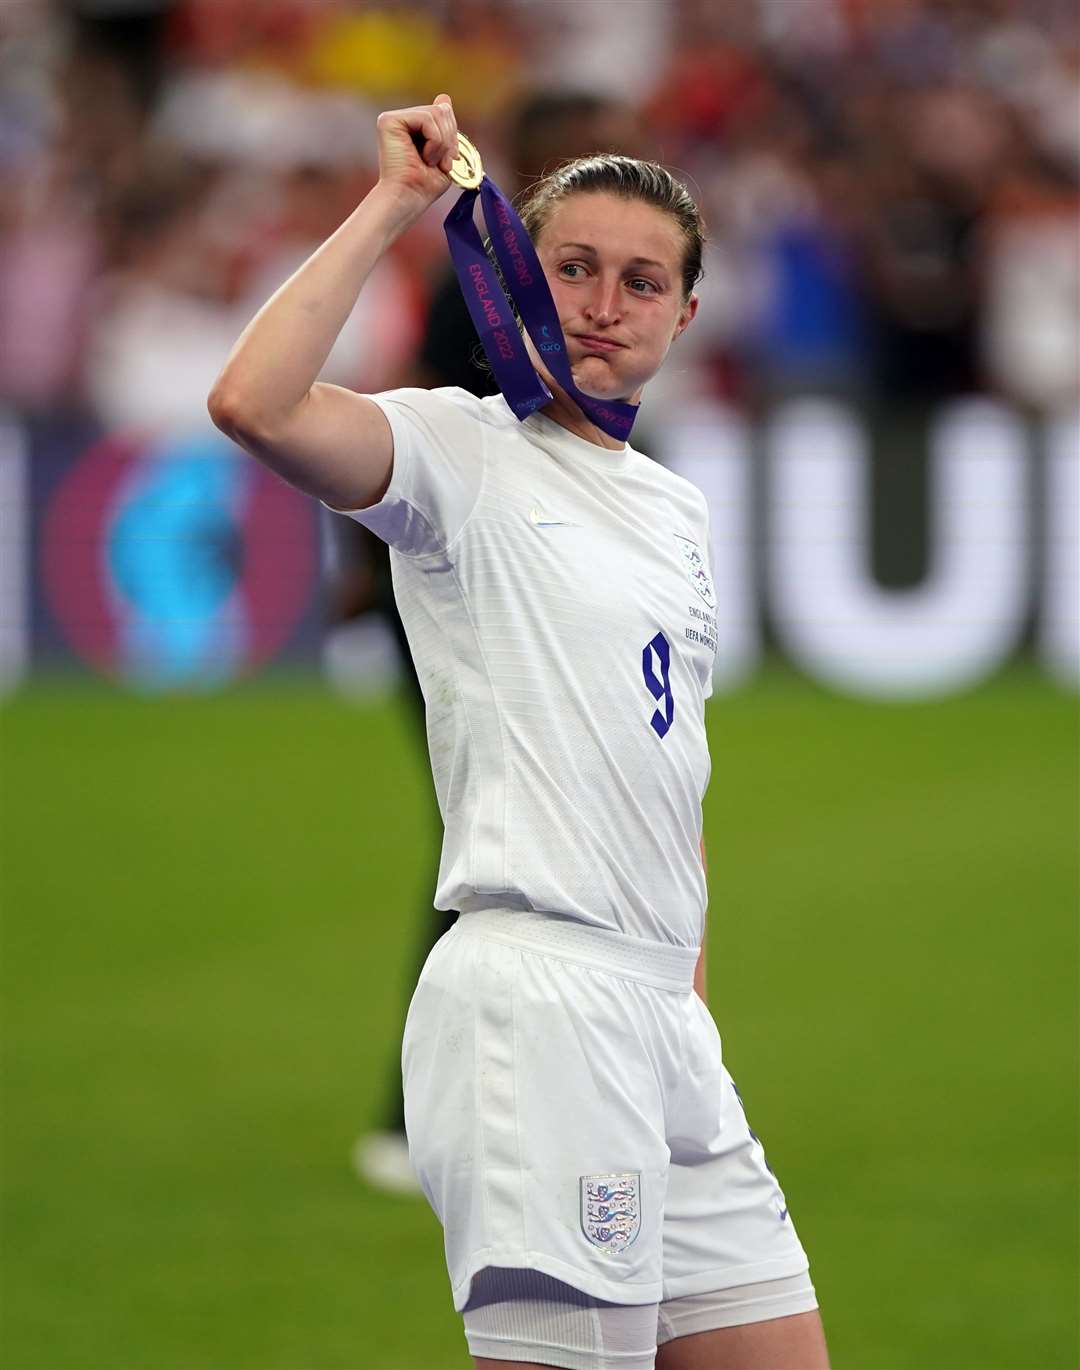 England footballer Ellen White will receive her MBE from the Prince of Wales at Windsor Castle (Nick Potts/PA)